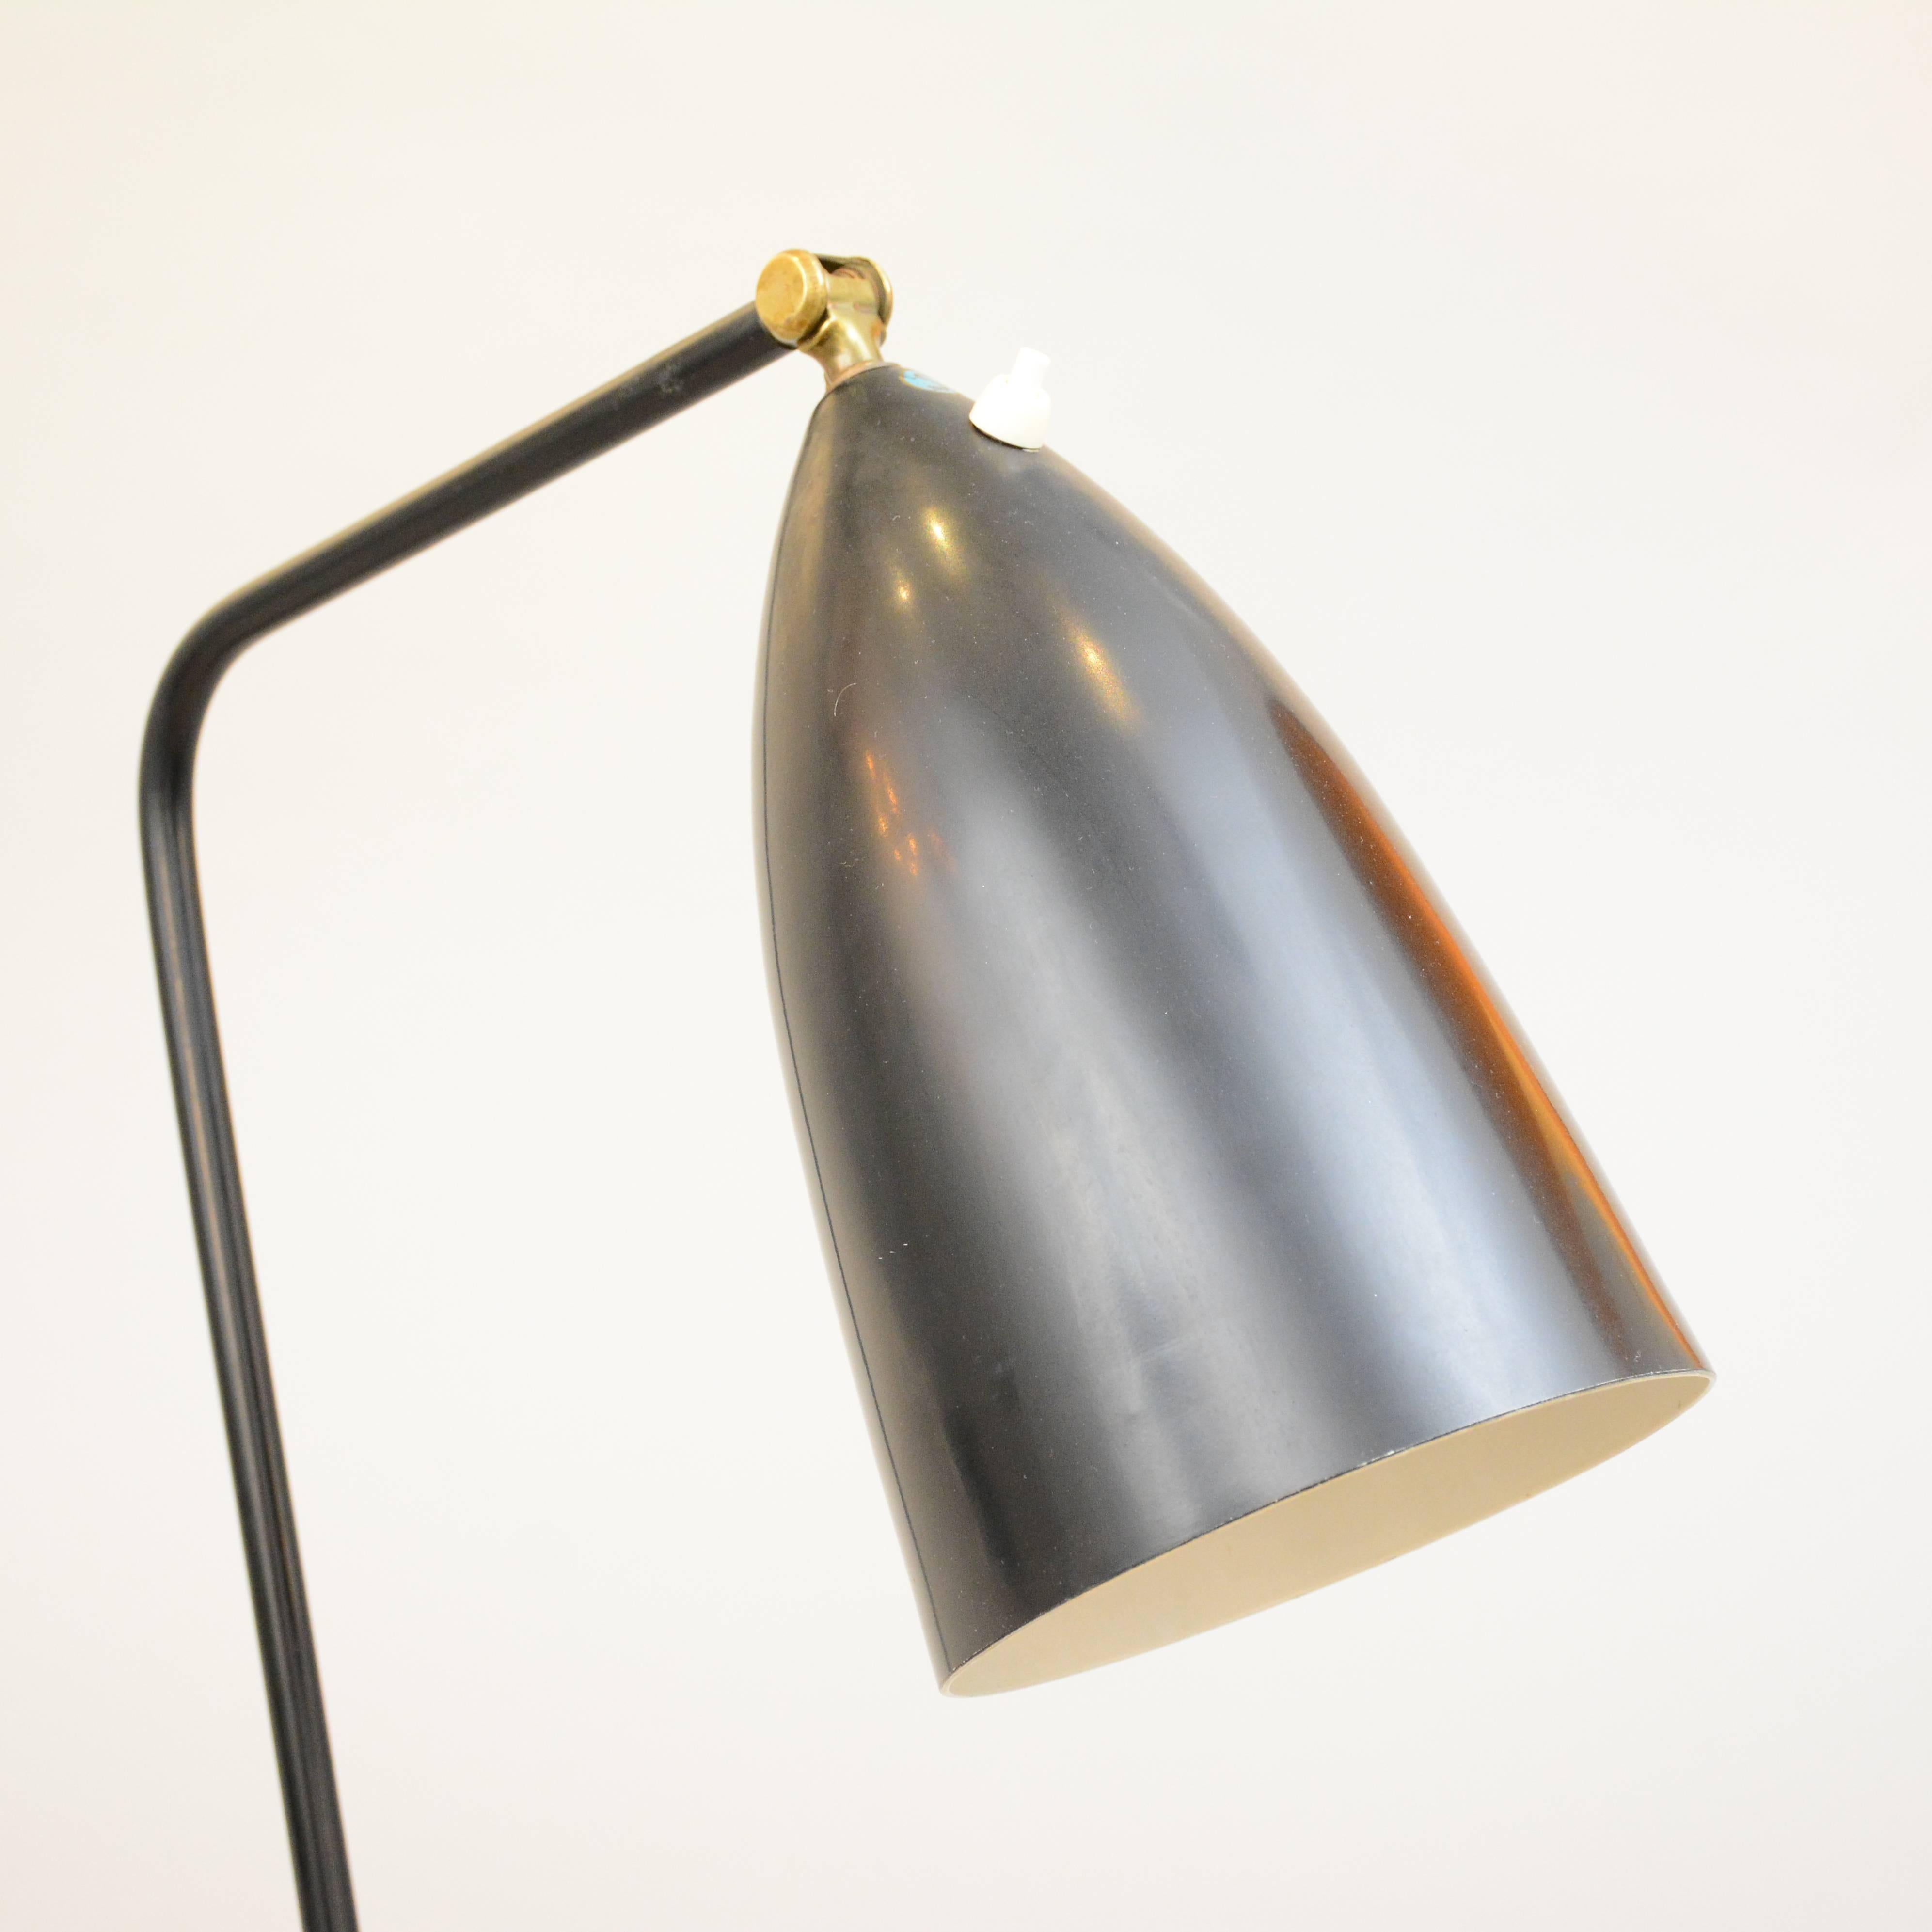 Grasshopper Lamp Grossman-Magnusson Bergboms Malmo, Sweden In Excellent Condition For Sale In Lund, SE